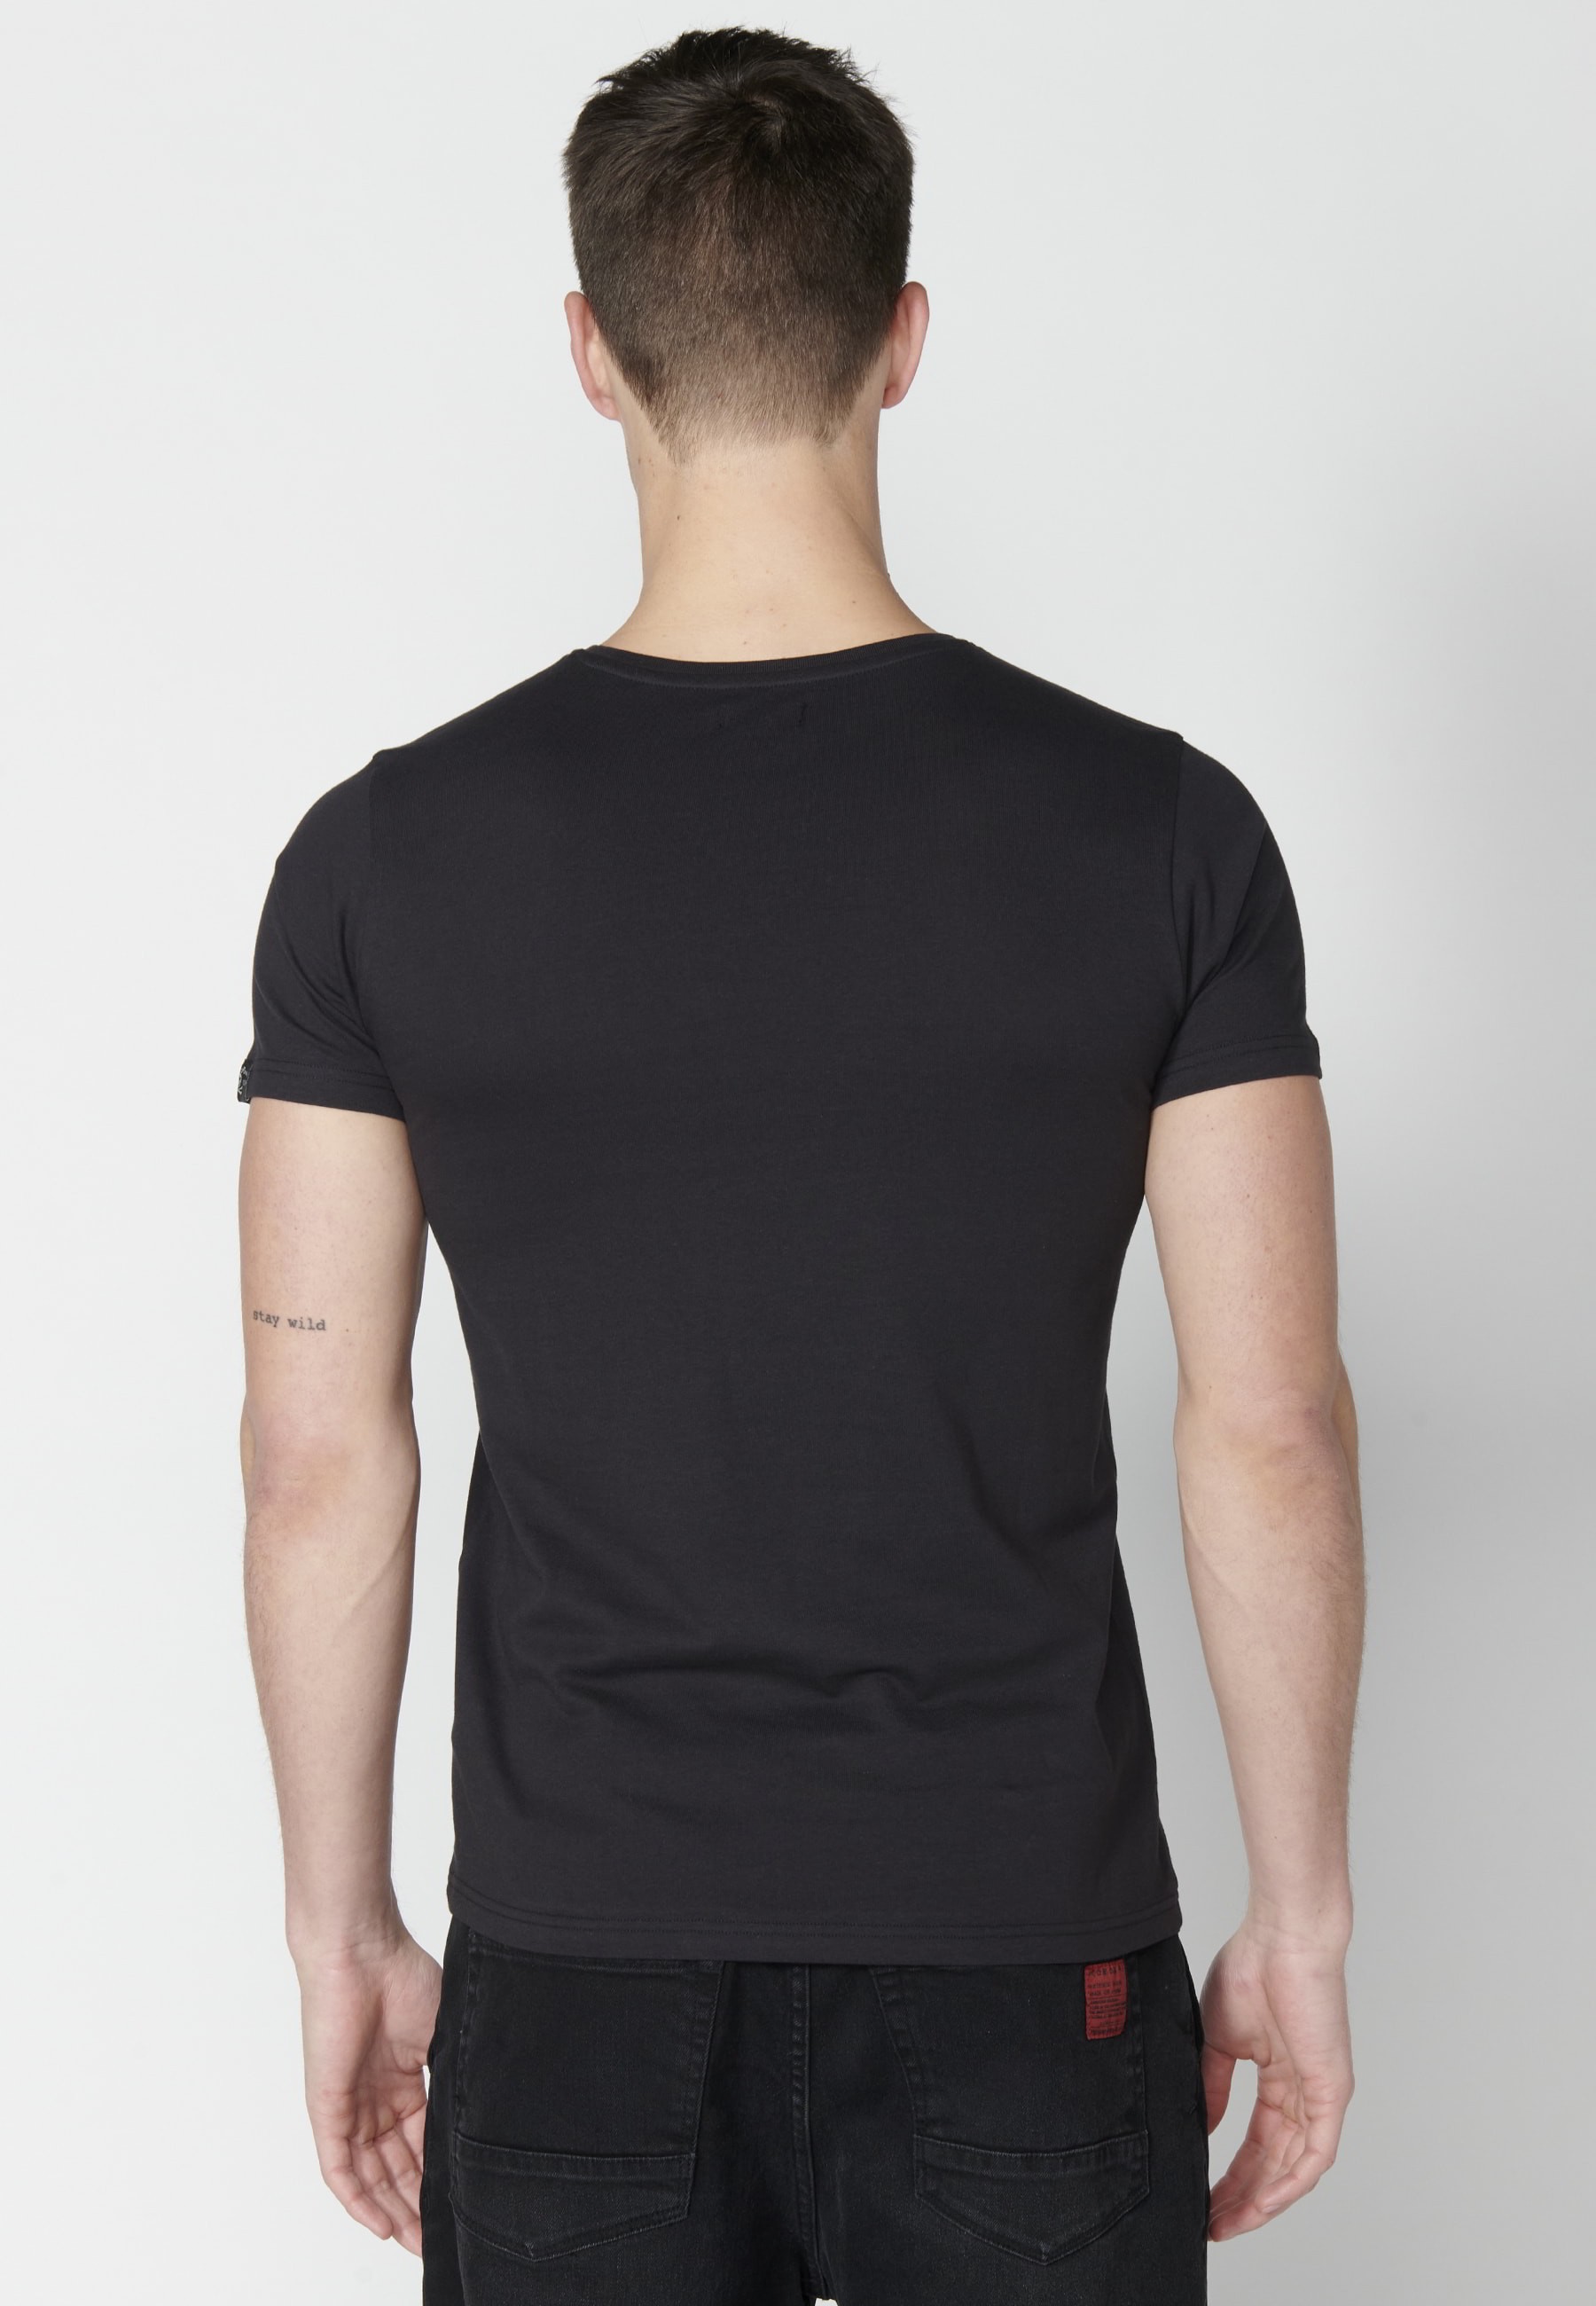 Short-sleeved Cotton T-shirt with Black front print for Men